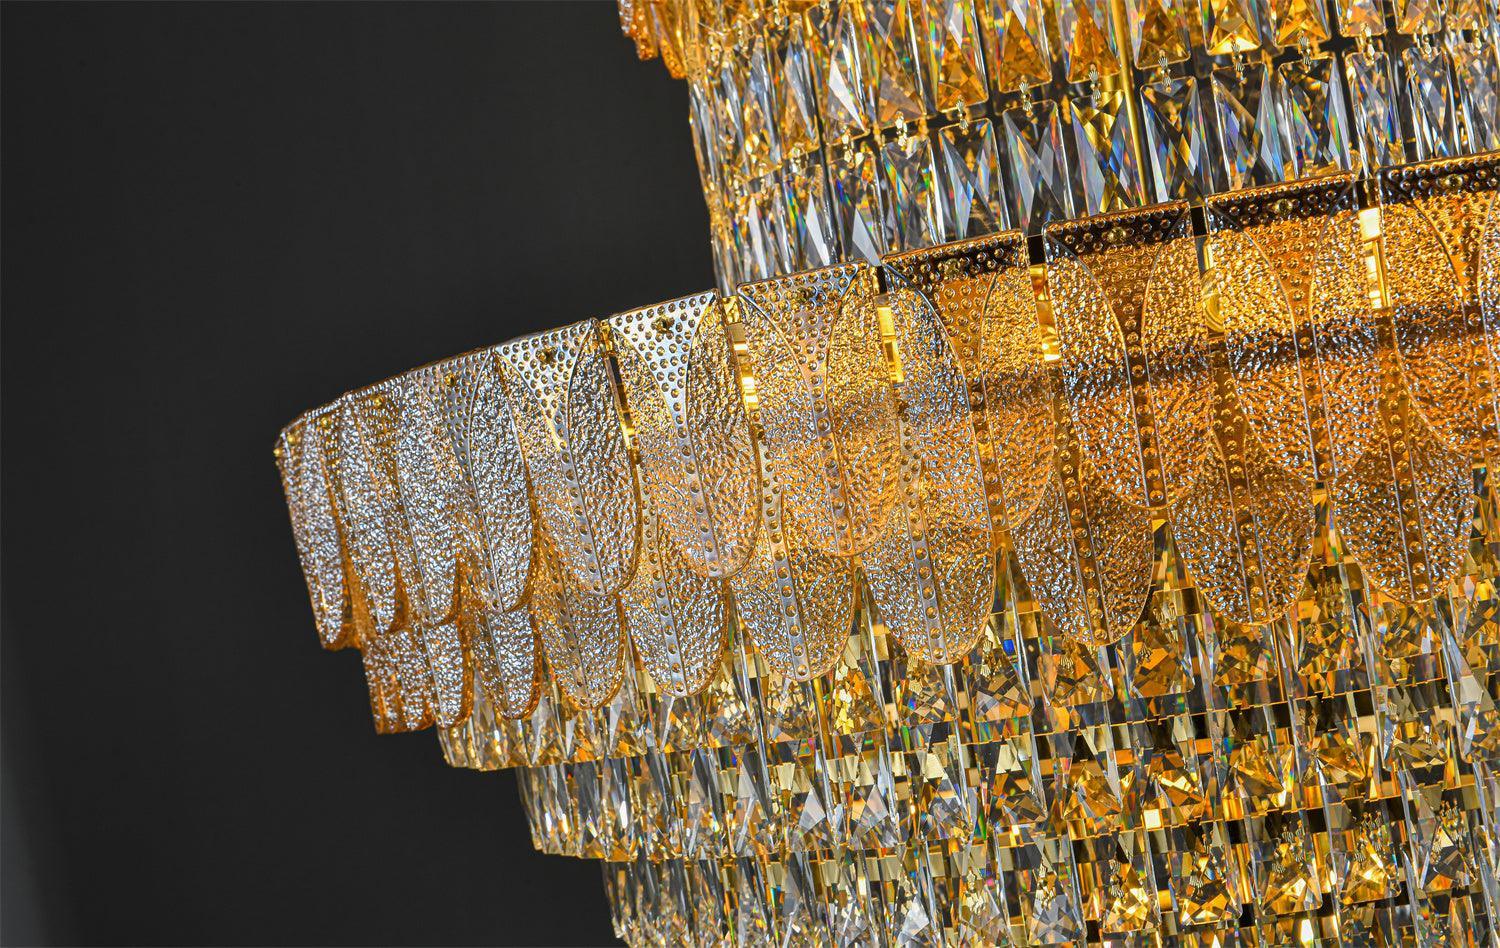 Contemporary Crystal Double Height Chandelier by The Light Library